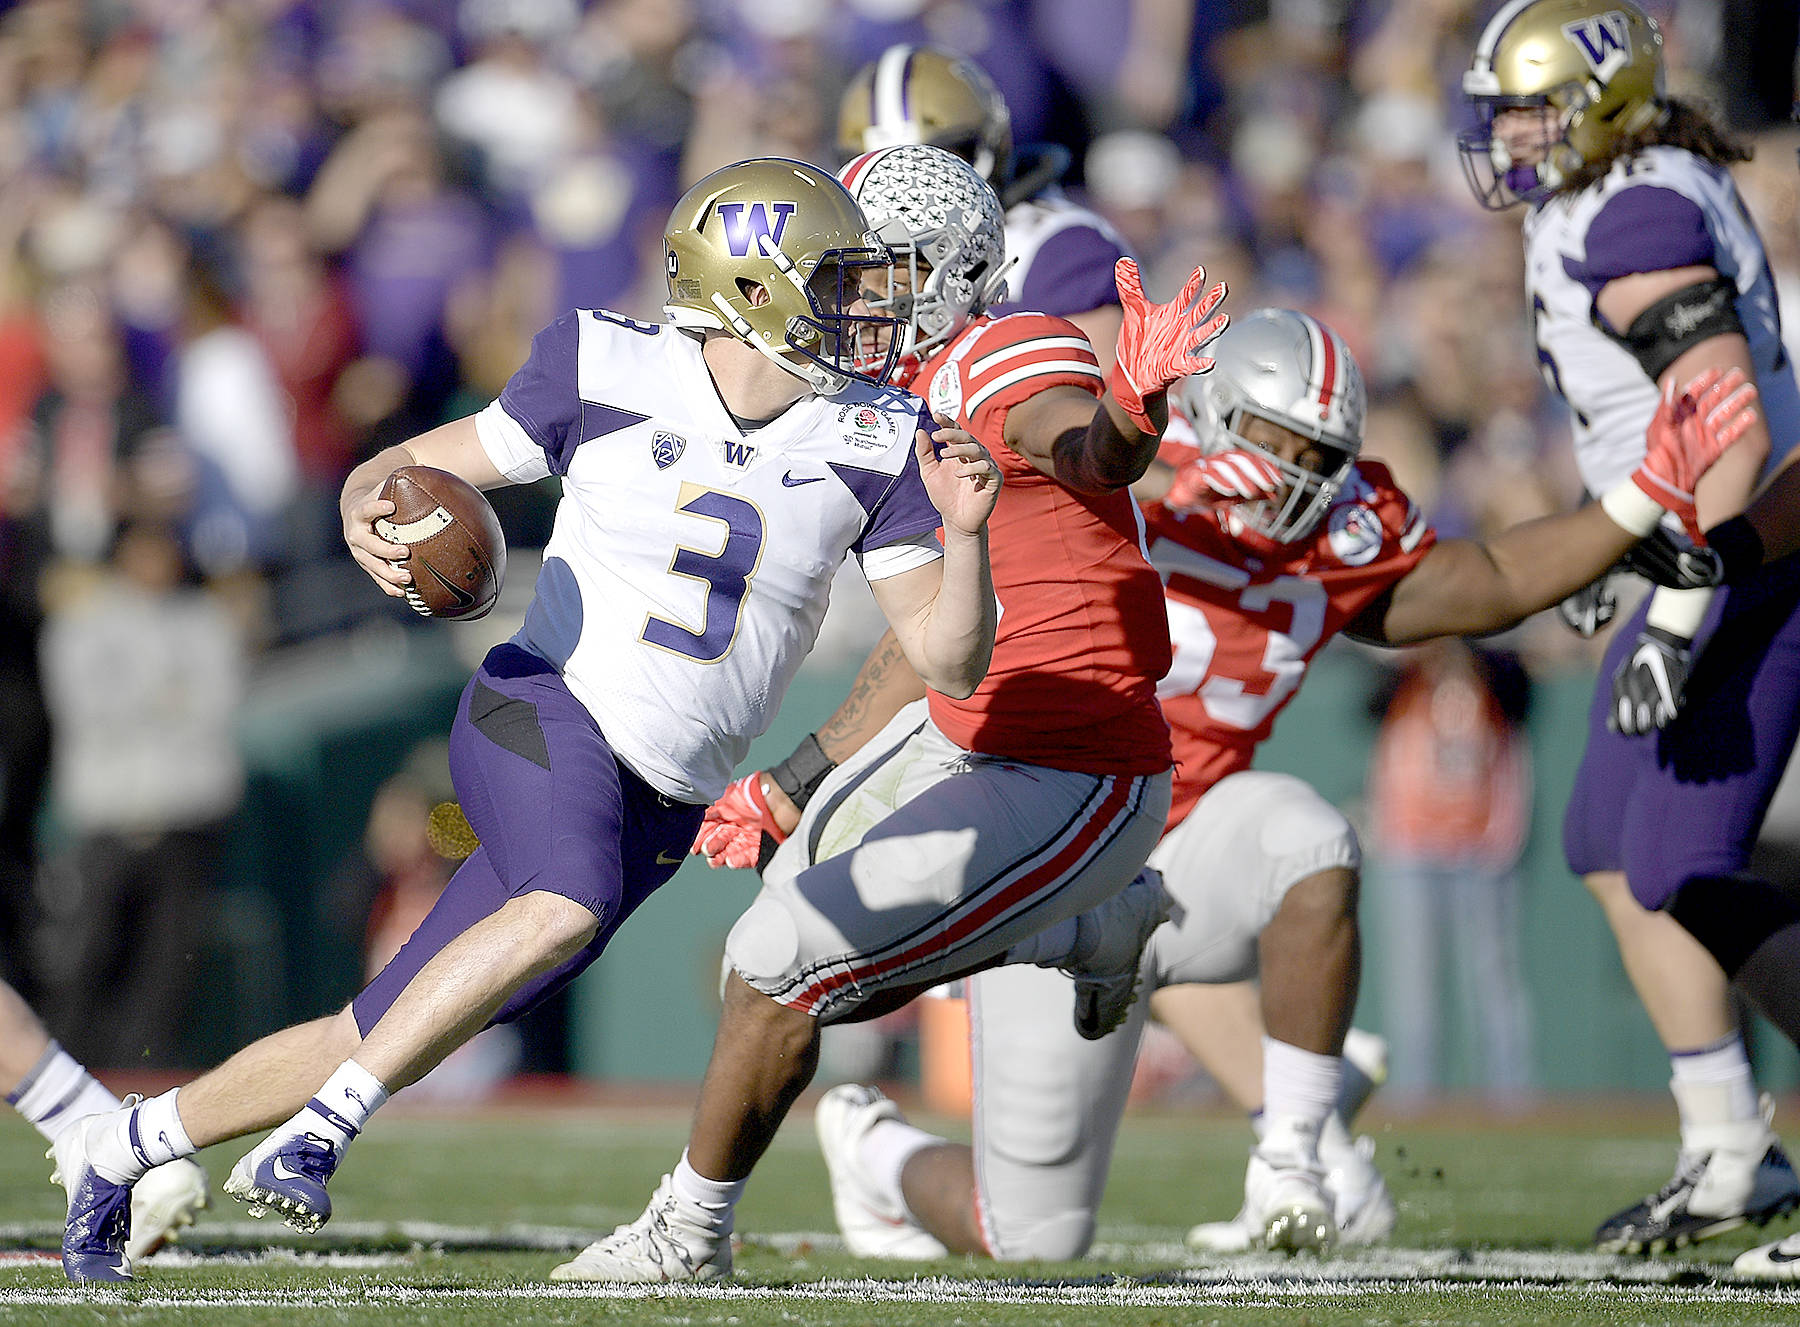 Washington quarterback Jake Browning runs against Ohio State during the first half of the Rose Bowl NCAA college football game Tuesday, Jan. 1, 2019, in Pasadena, Calif. (AP Photo/Mark J. Terrill)